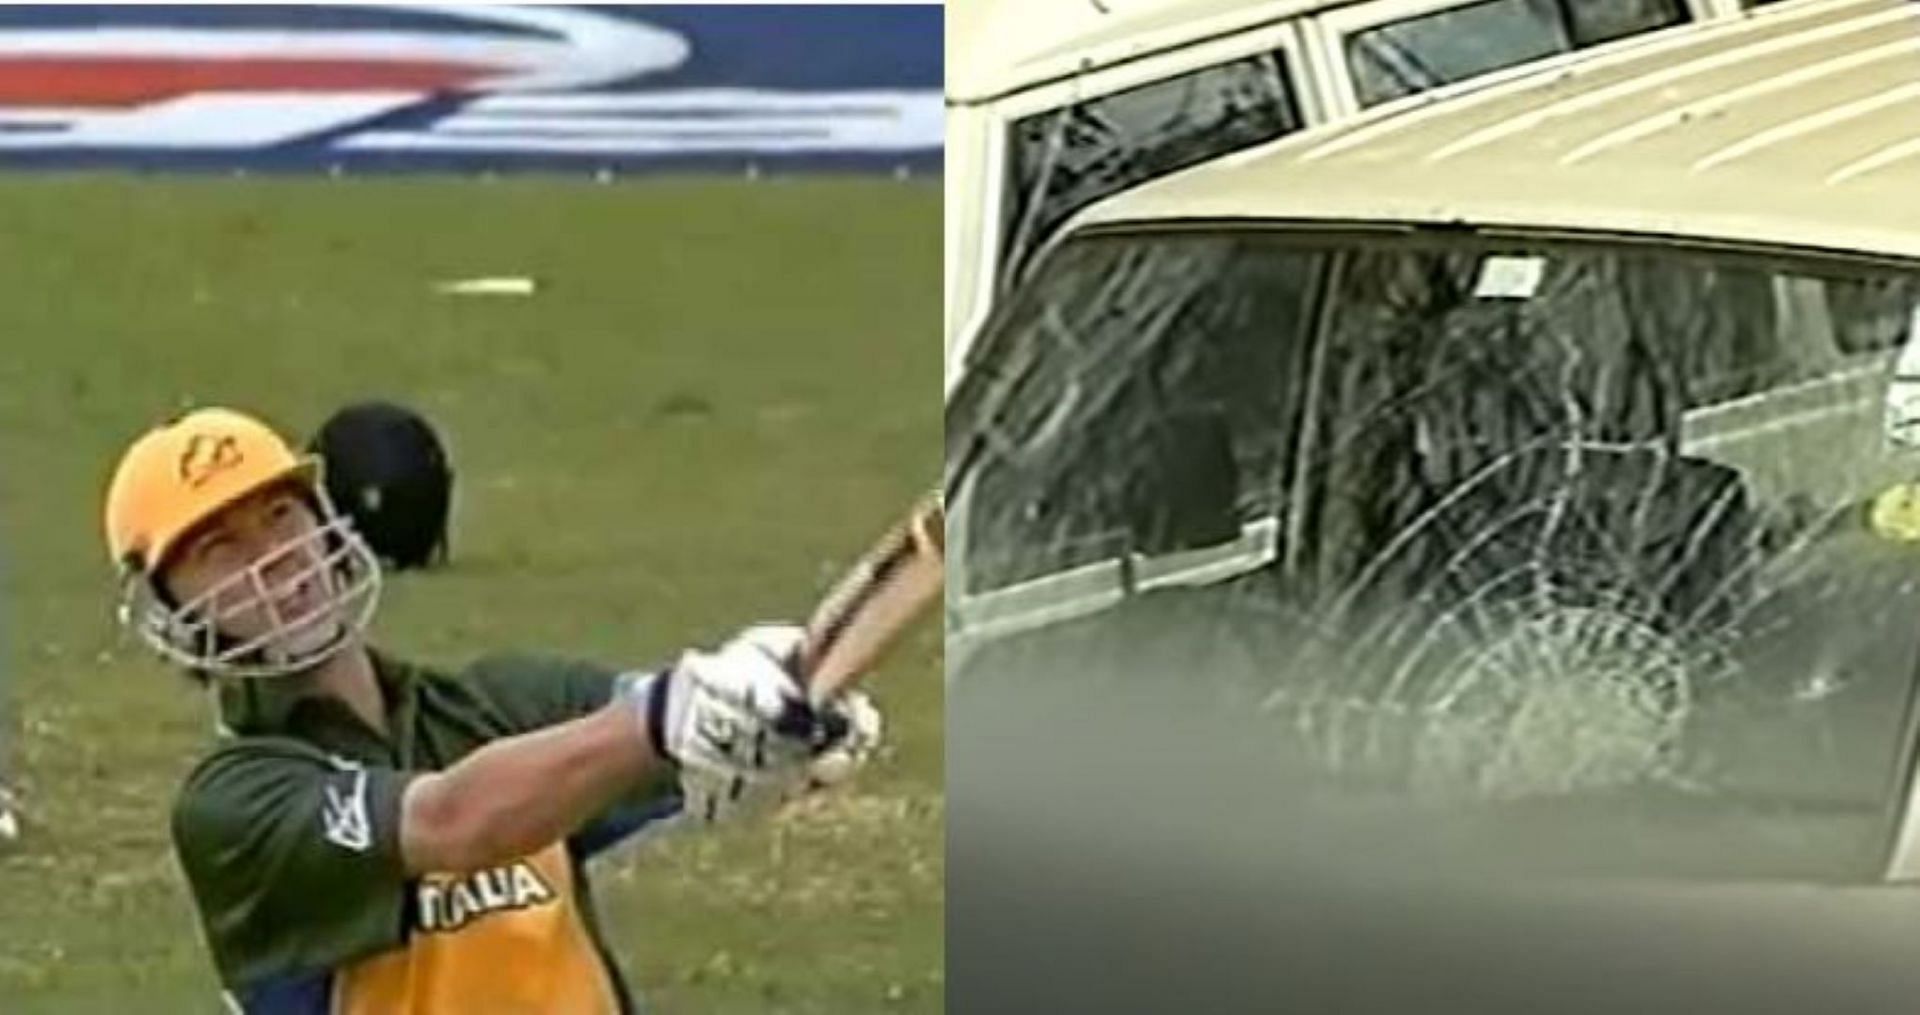 Brett Lee had a full swing of his arms that broke the car window.